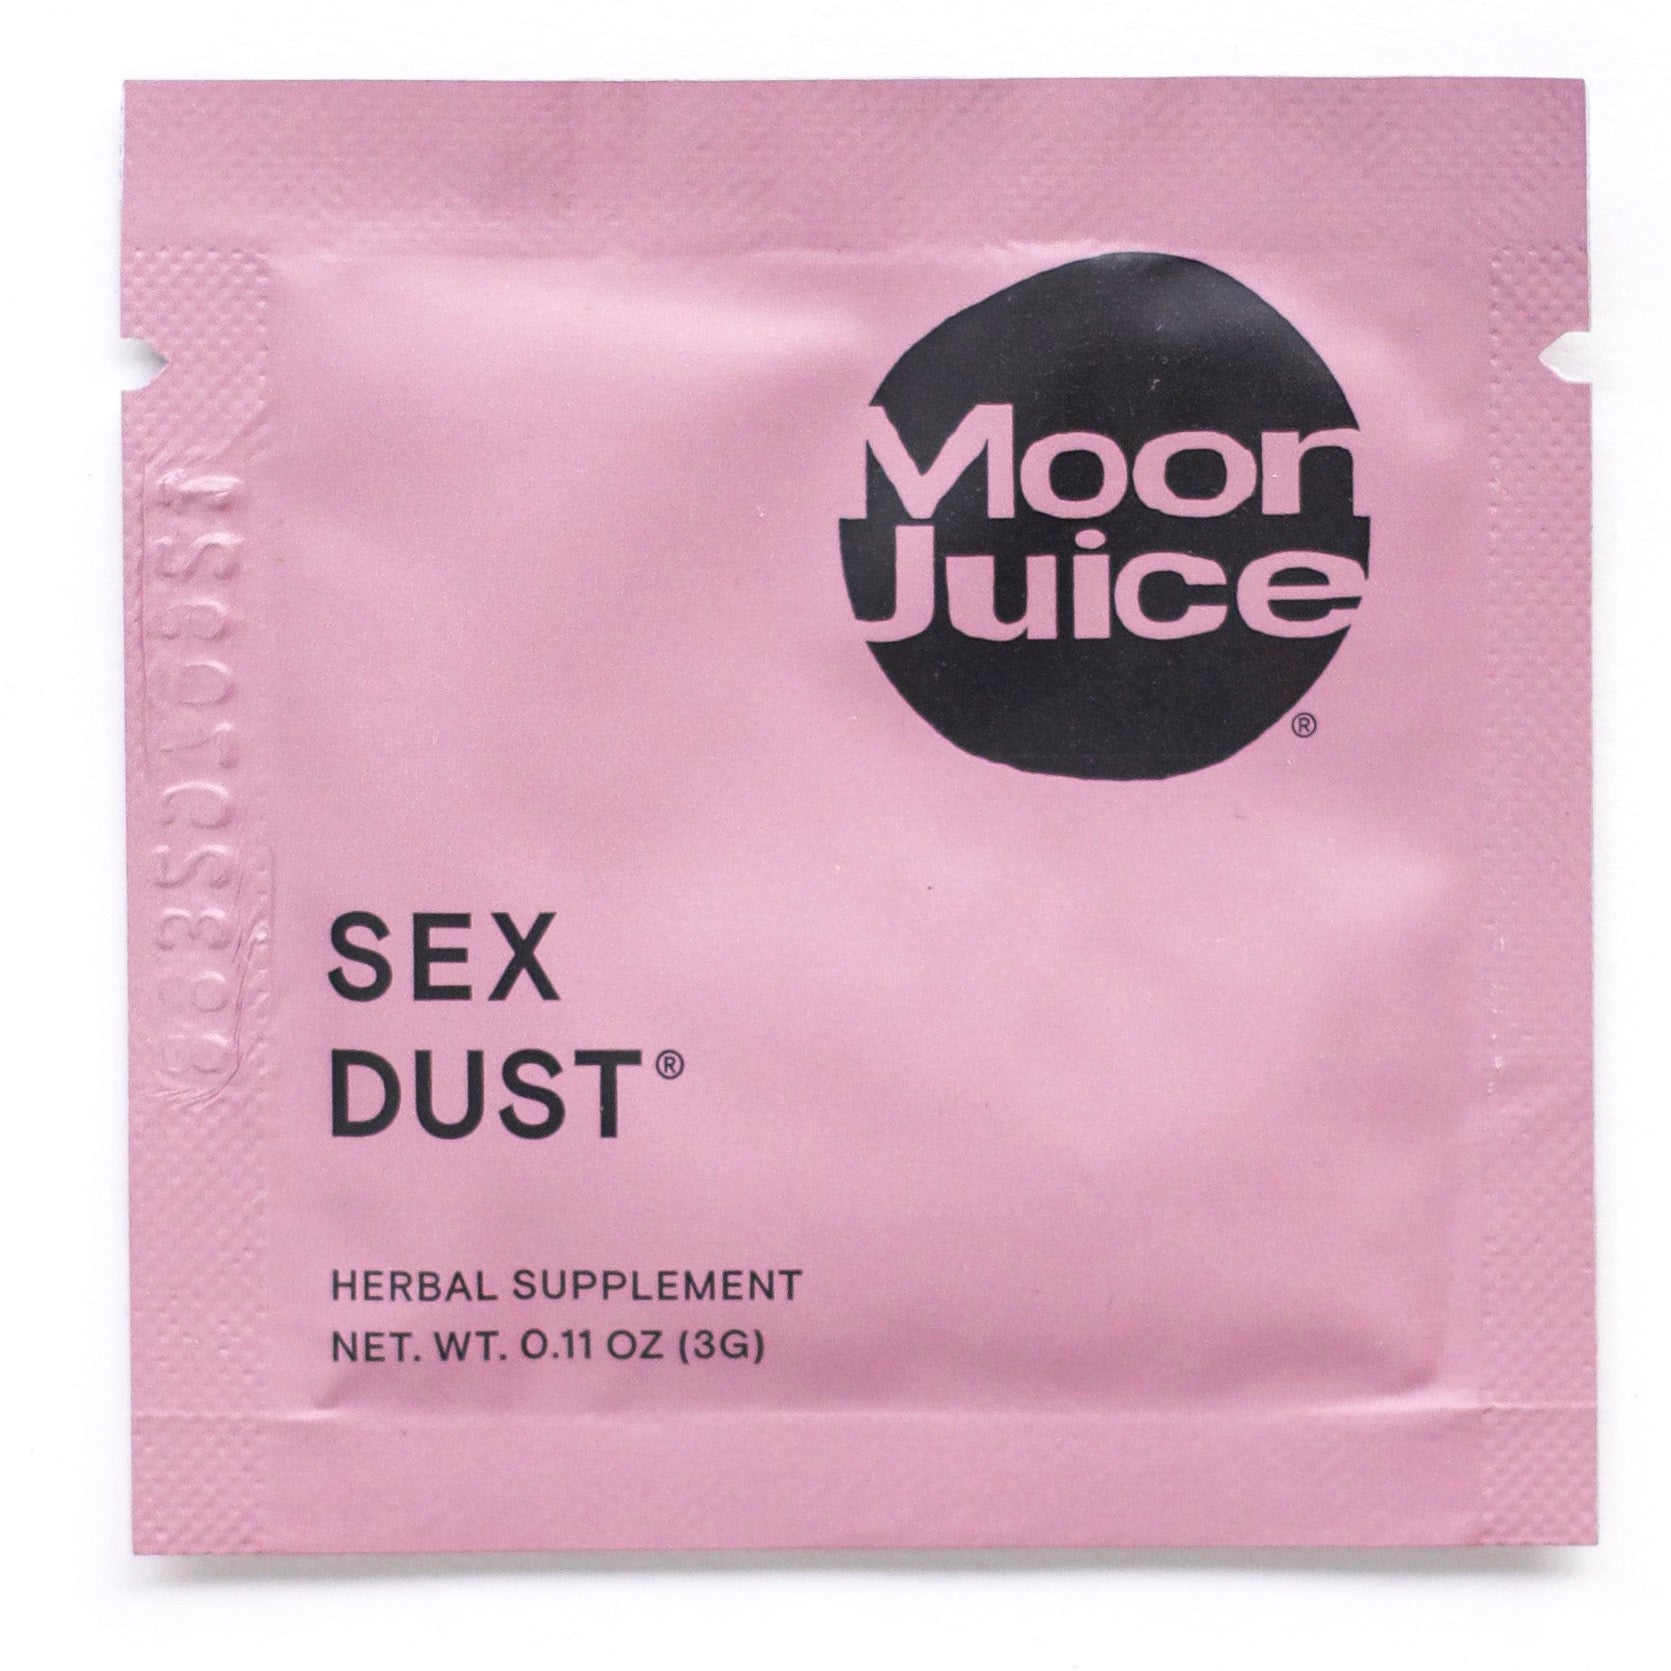 Purple square packet of "Sex Dust"